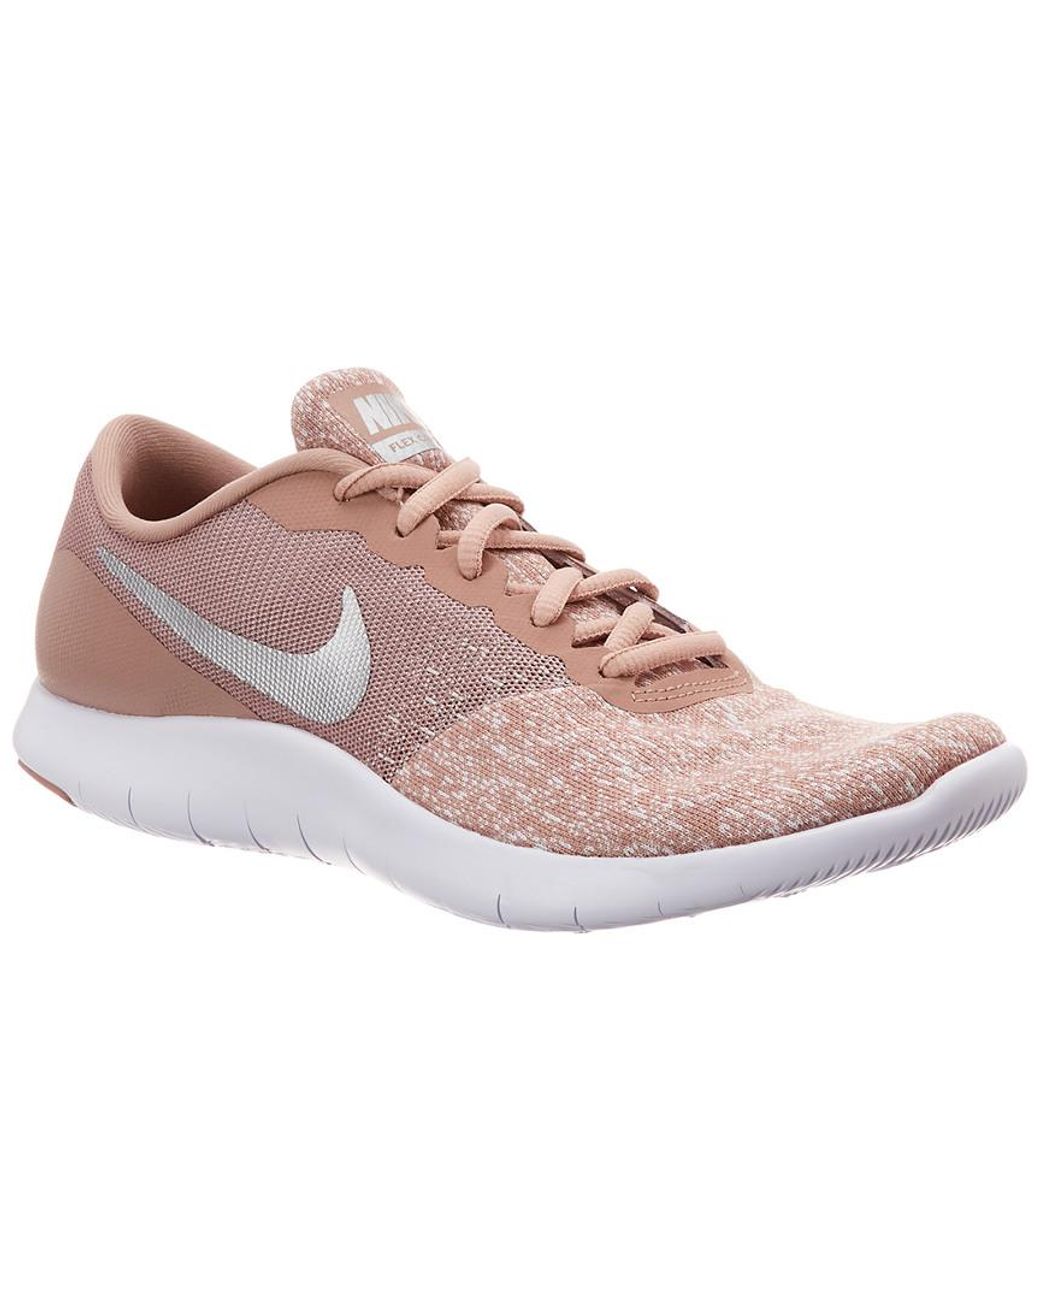 Nike Flex Contact Running Shoe in Pink | Lyst Canada